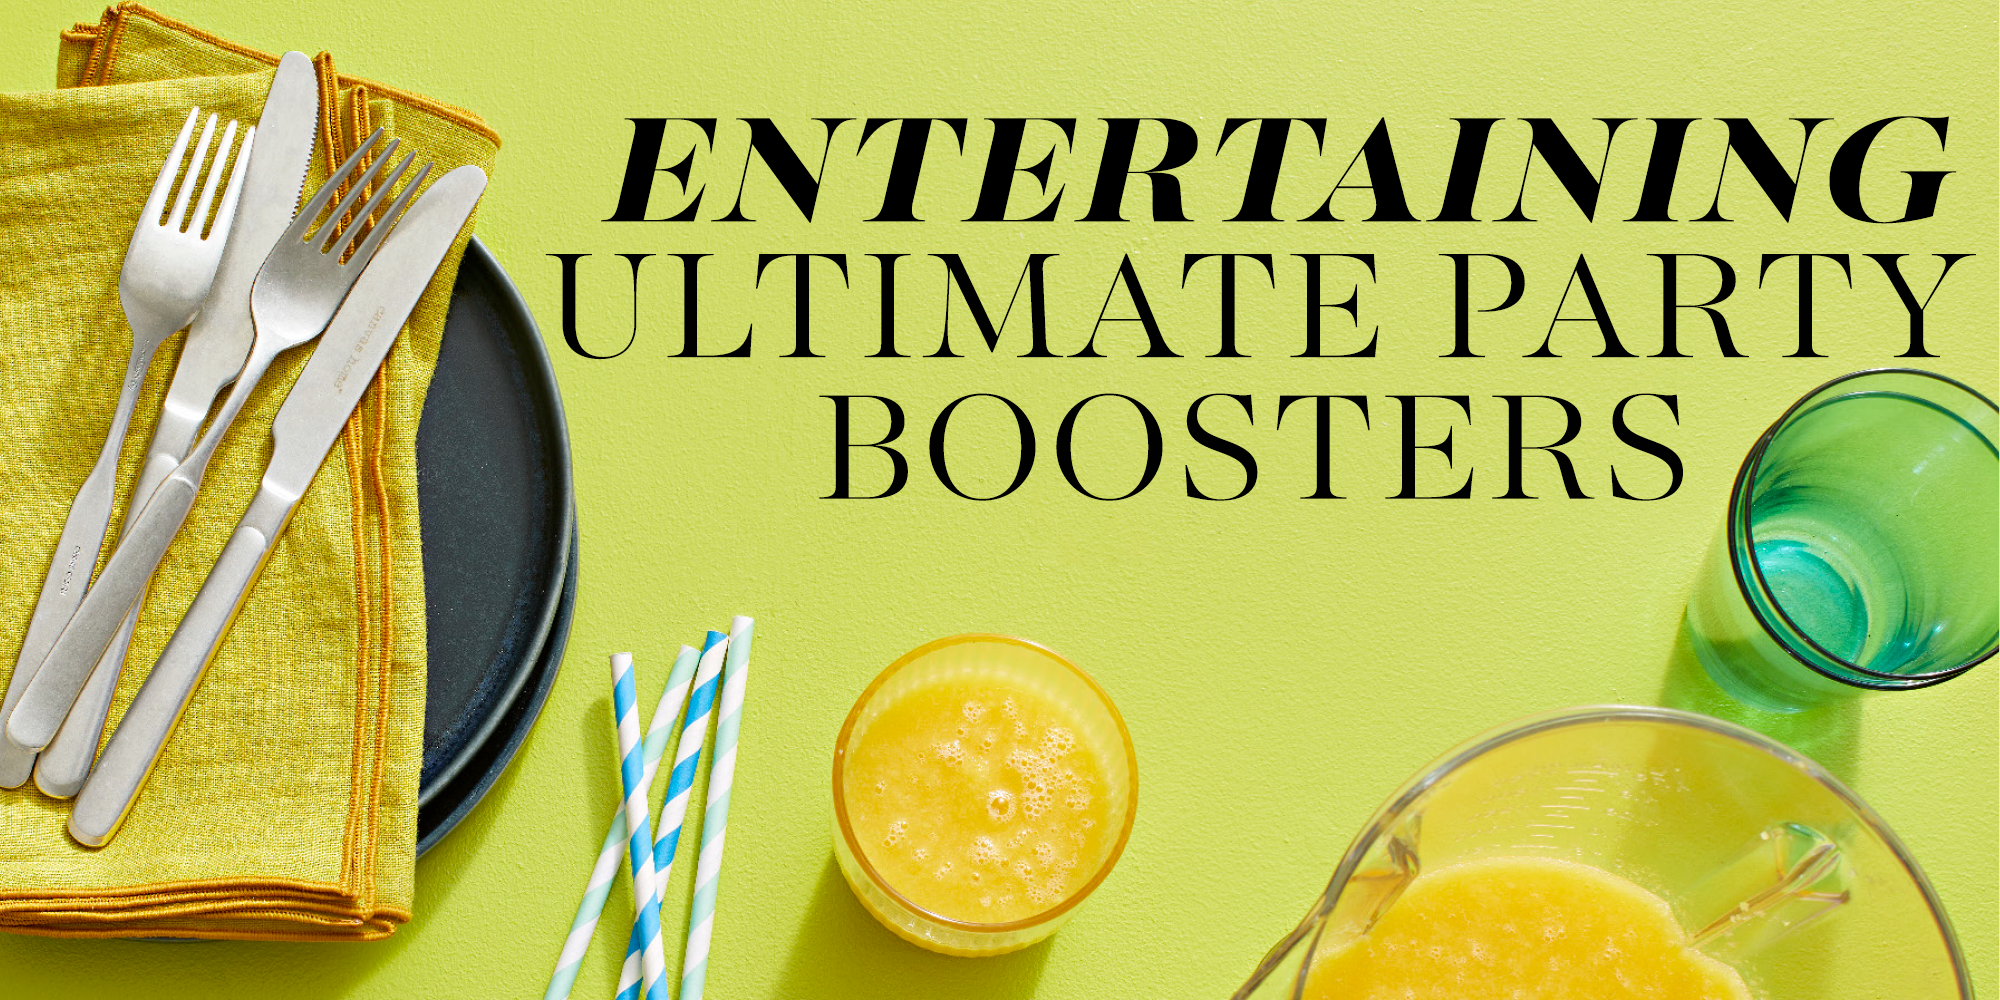 entertaining ultimate party boosters